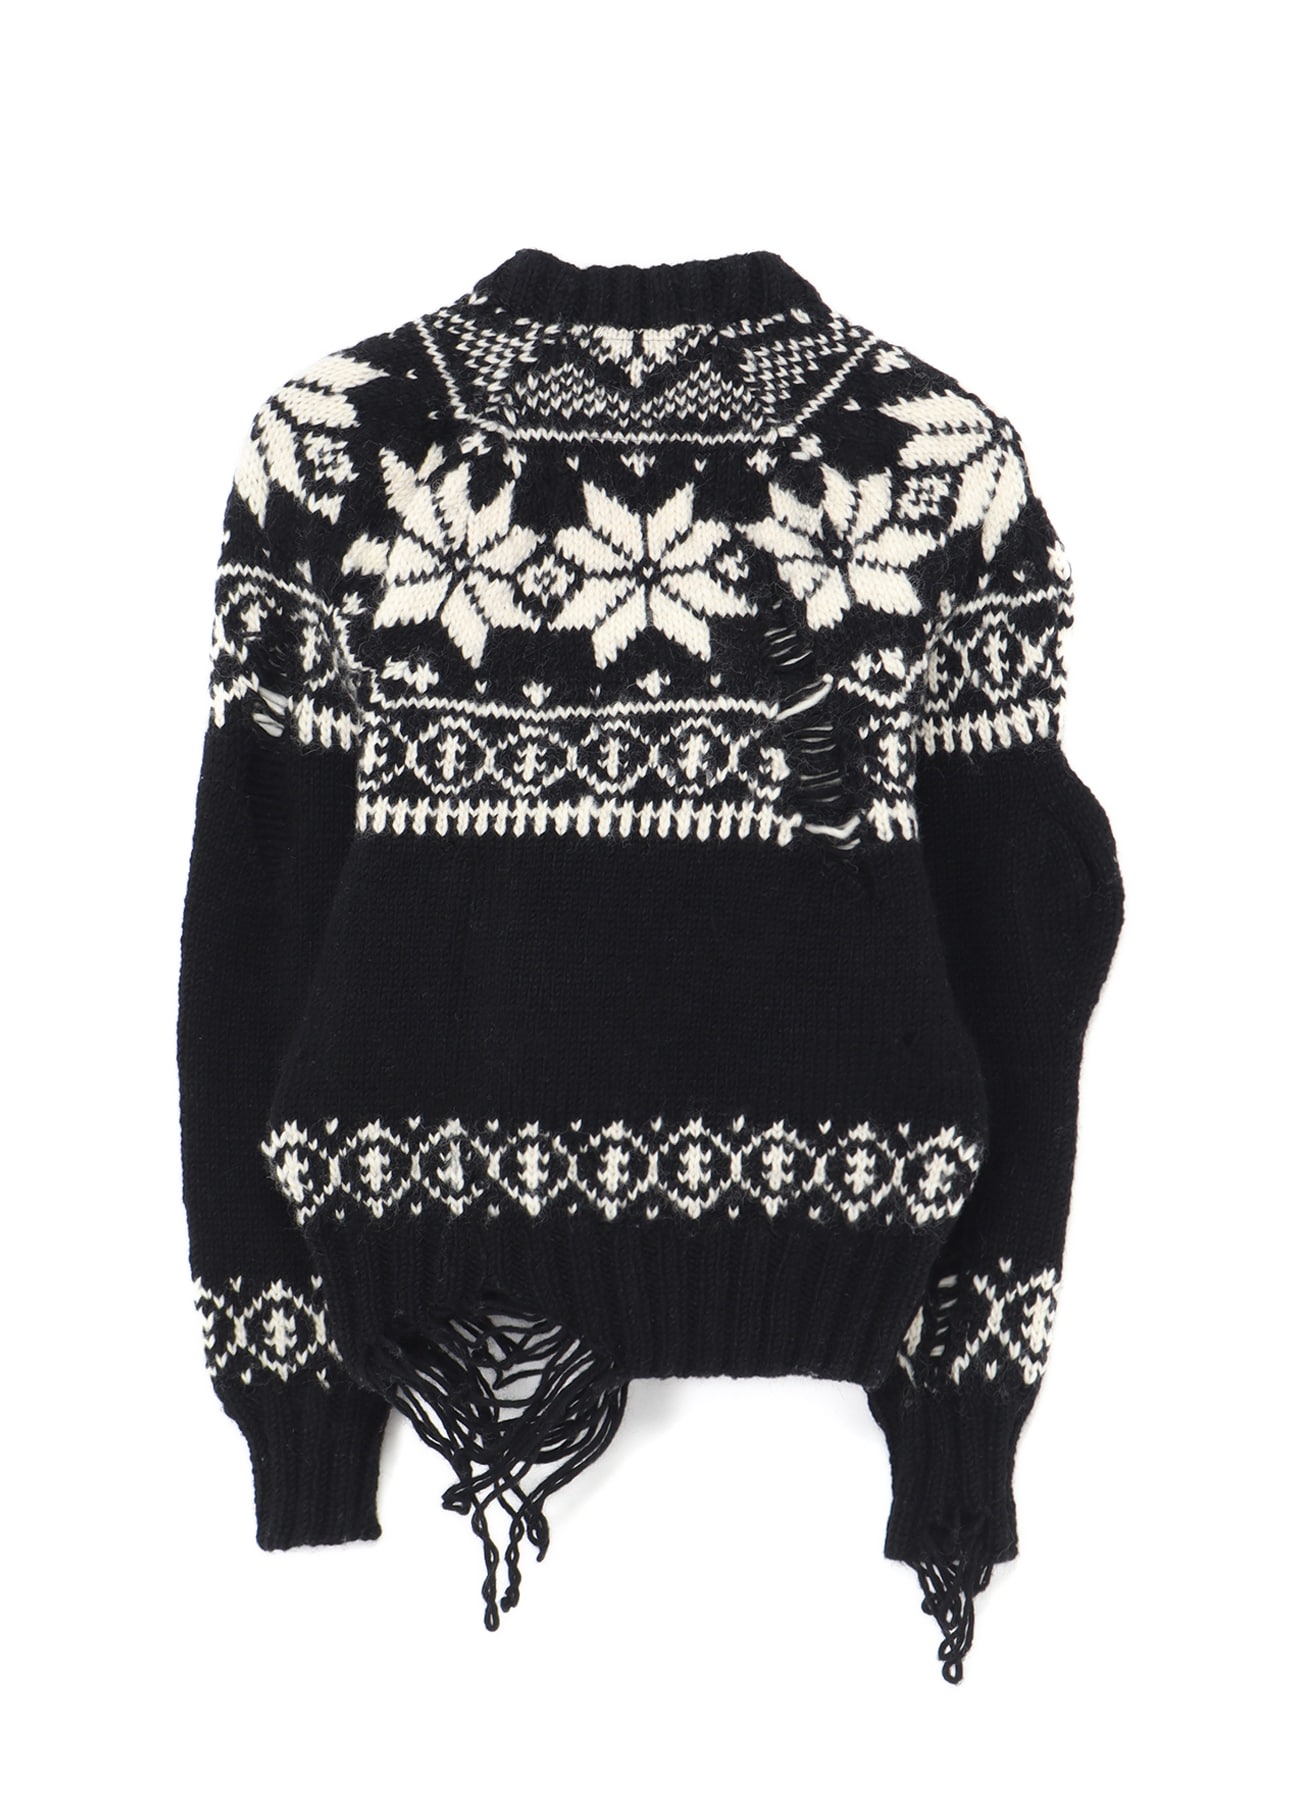 WILDSIDE x pillings Unstable Nordic Pullover (knit crash)